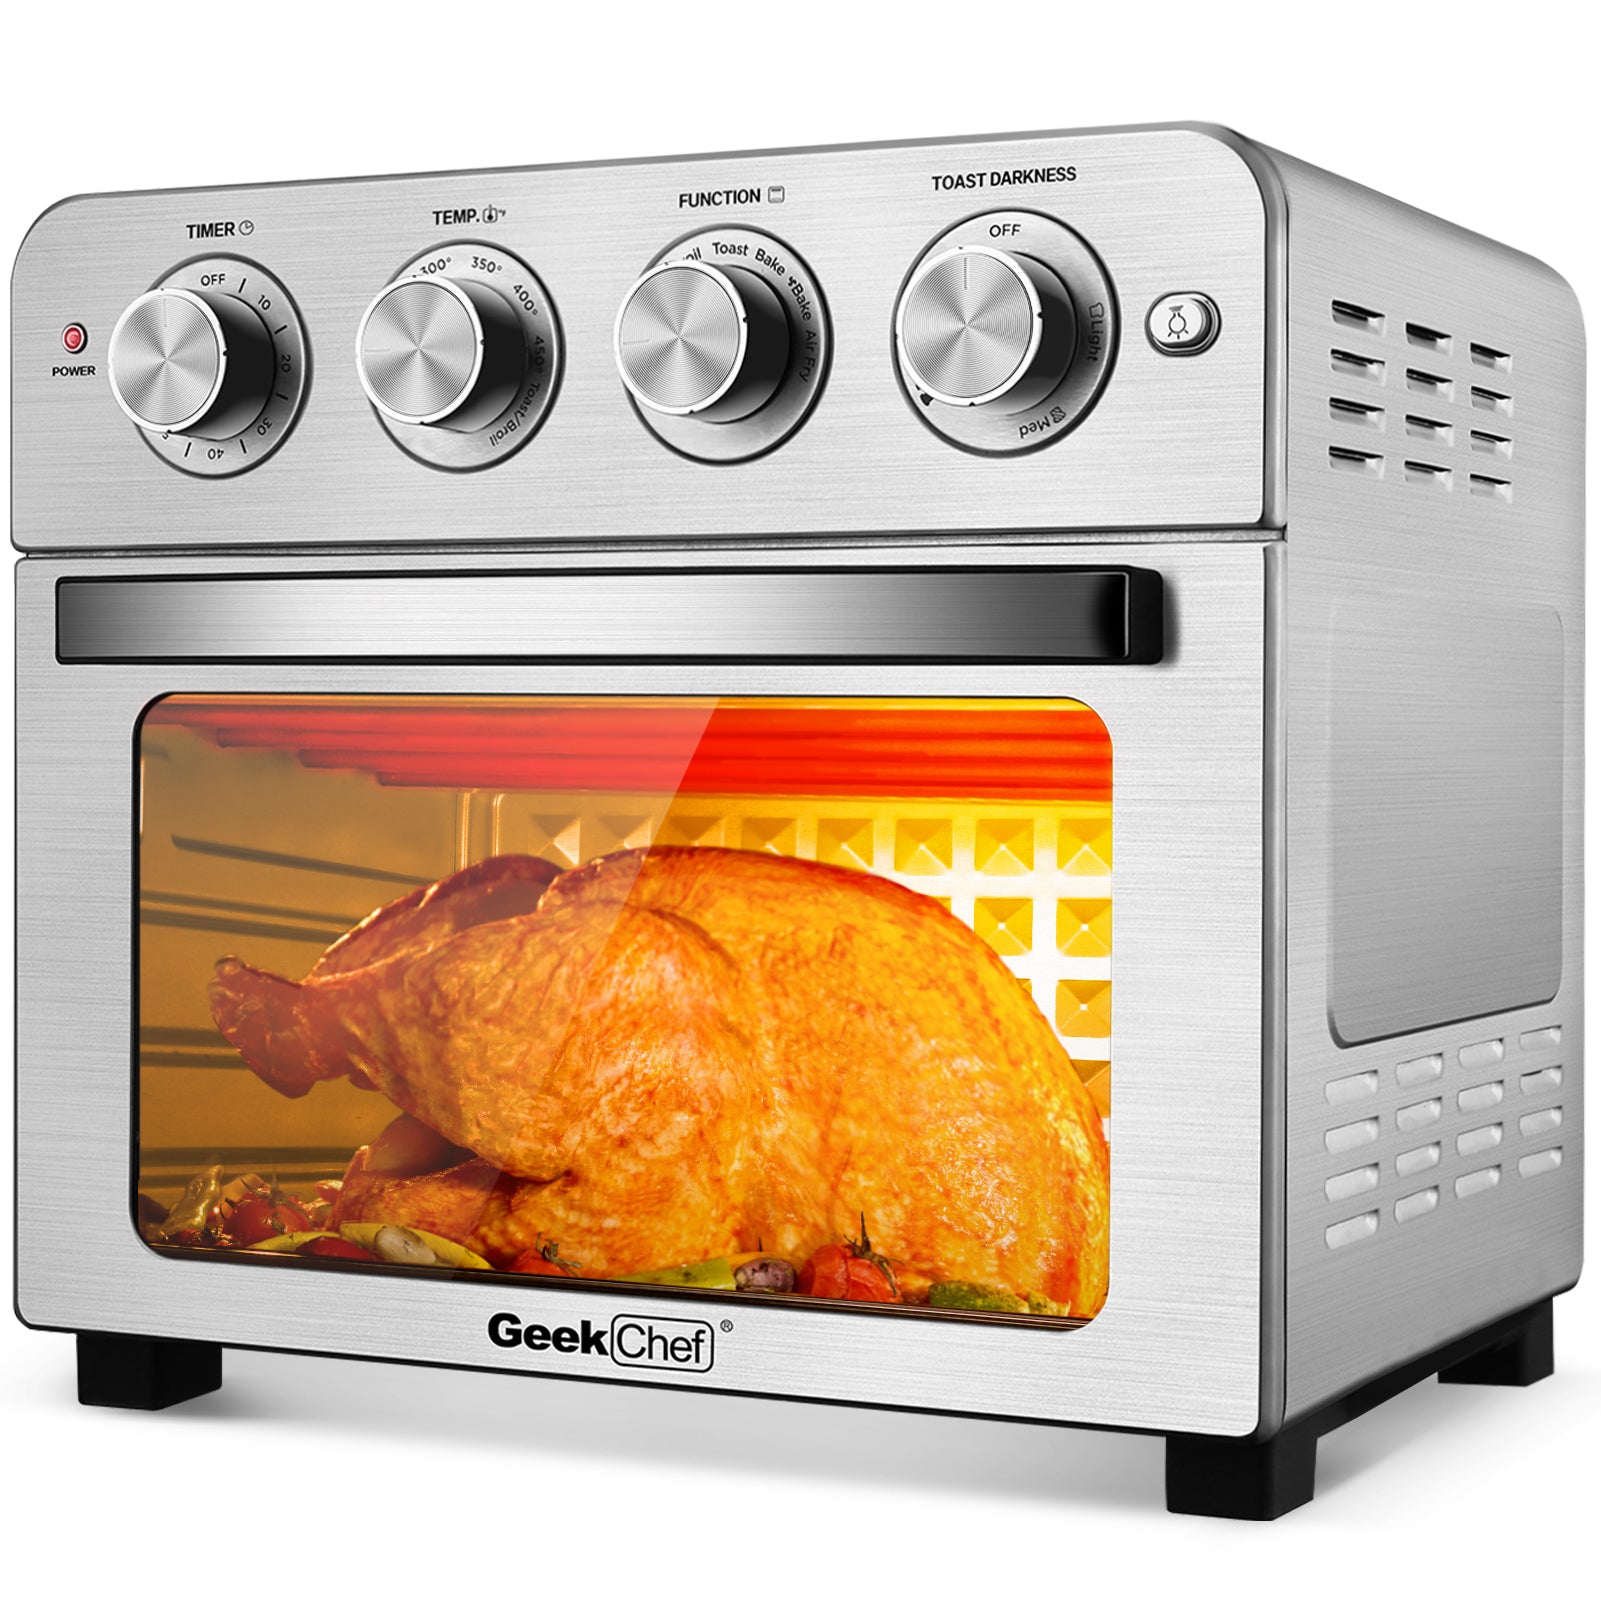 WEESTA 24QT Air Fryer Oven 7-in-1 Air Fryer Convection Toaster